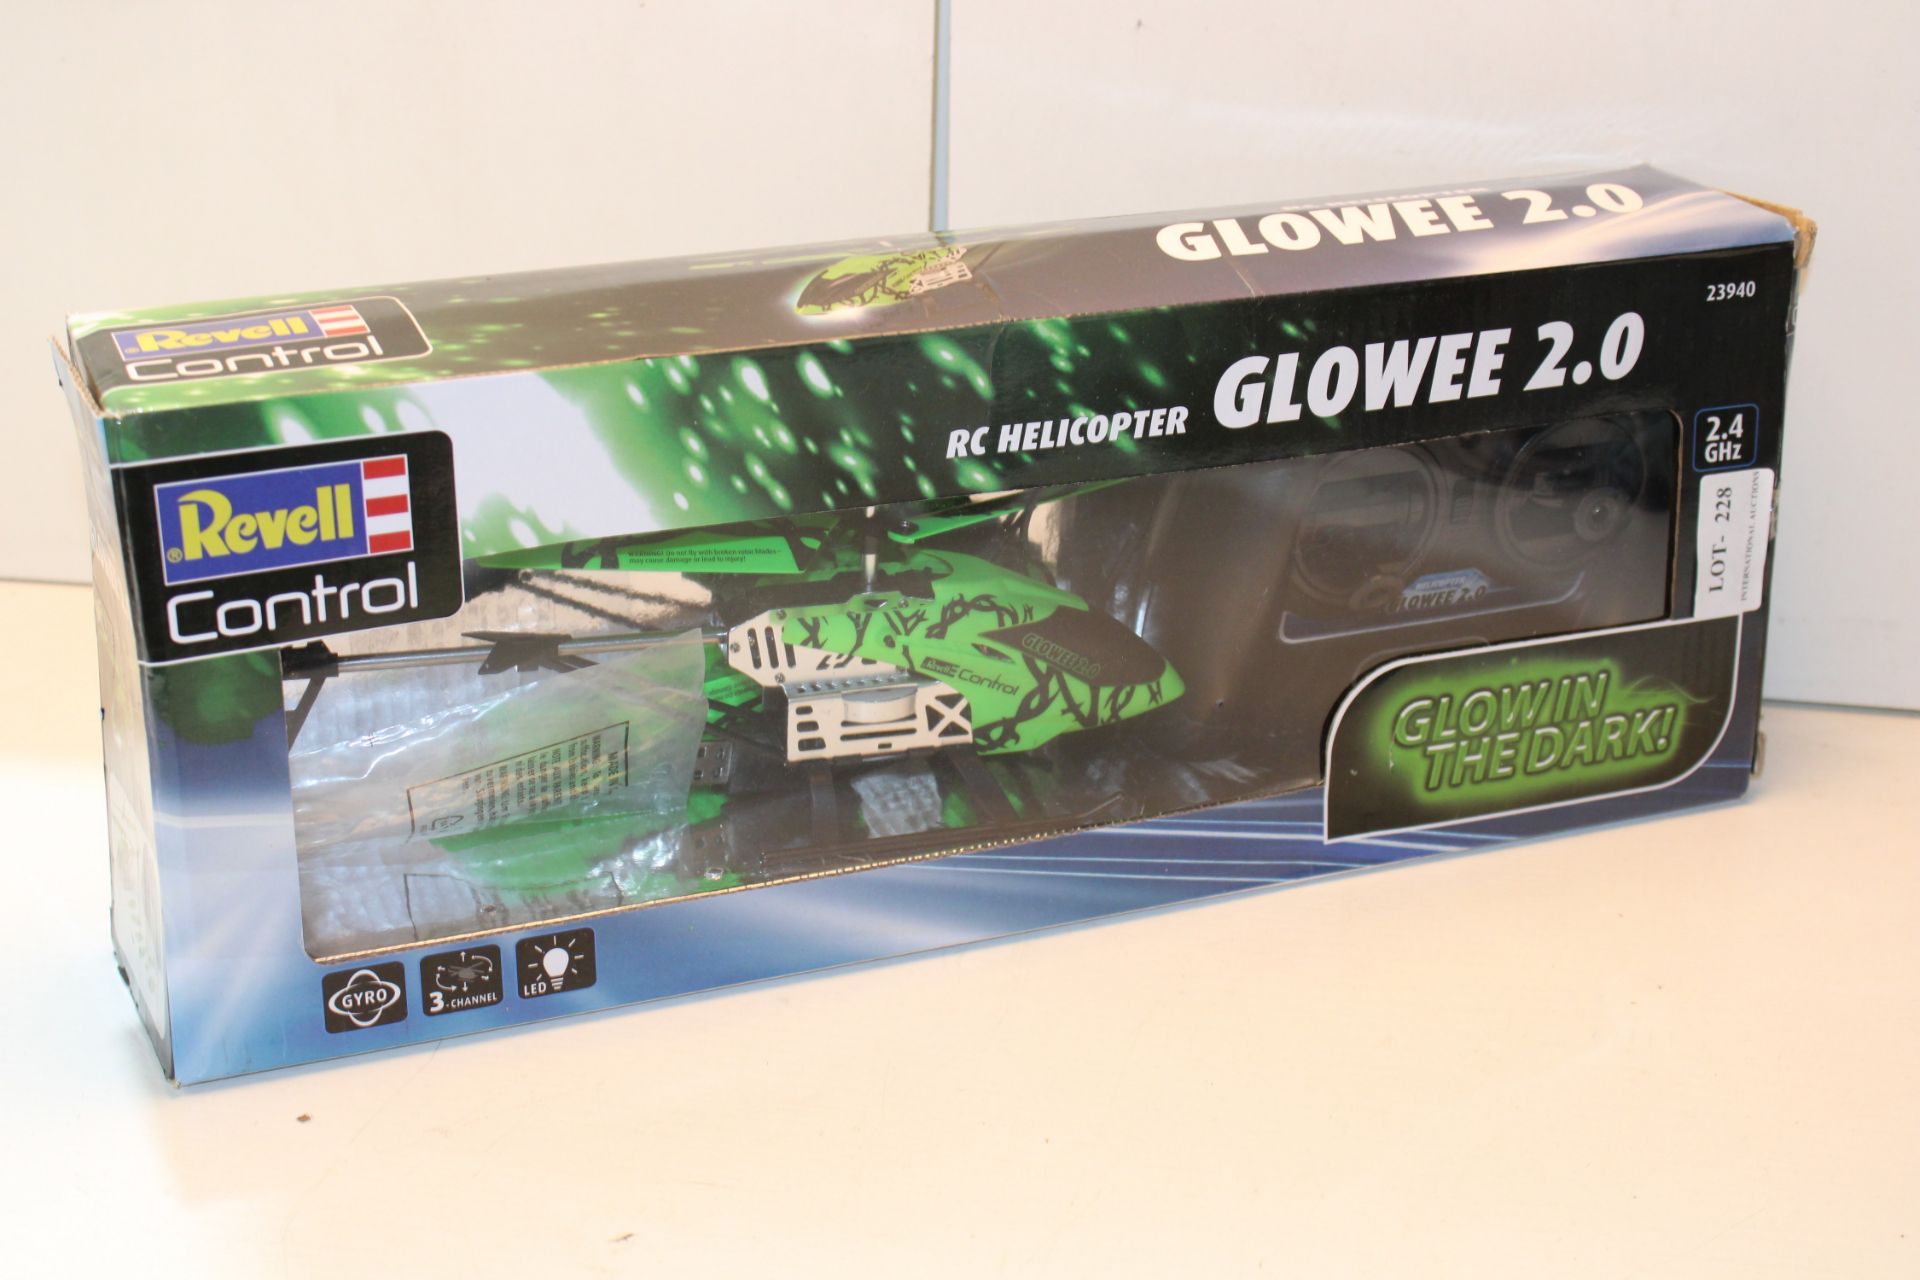 BOXED REVELL CONTROL RC HELICOPTER GLOWEE 2.0Condition Report Appraisal Available on Request- All